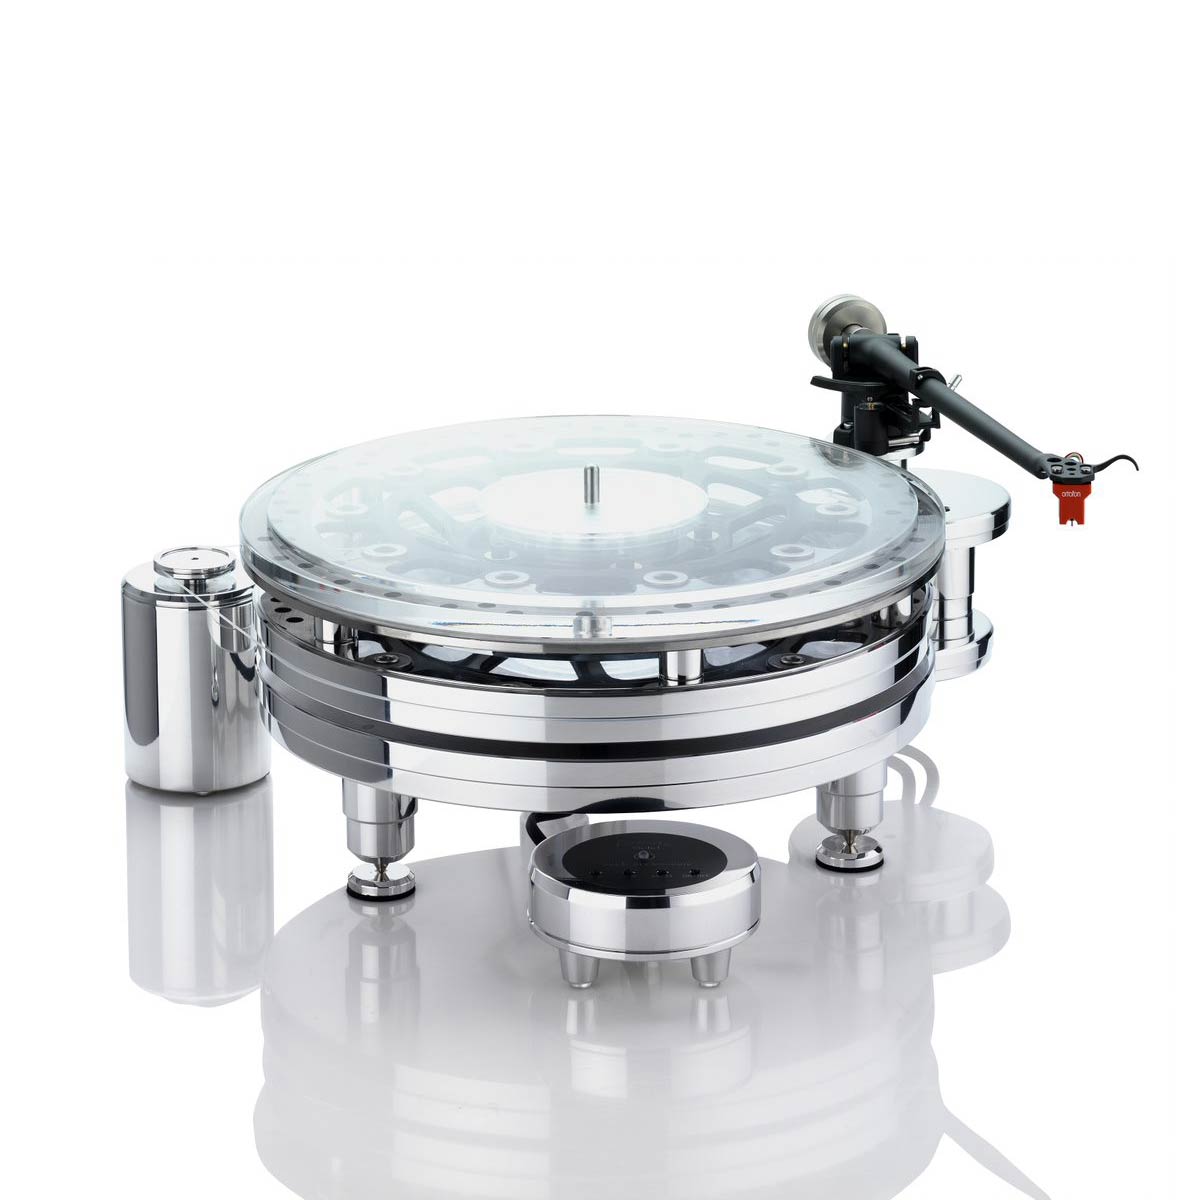 ACOUSTIC SOLID - SOLID BRAKE TURNTABLE - Experience a listening pleasure in perfection with the High-quality technology and acoustics with Acoustic Solid. Best price at Vinyl Sound for all Acoustic Solid Turntables, Cartridges, tonearms and Phono Amplifiers: Acoustic Solid - Solid Brake - Acoustic Solid - Solid Machine – Acoustic Solid - Solid Edition – Acoustic Solid - Solid Royal – Acoustic Solid - Solid Stand